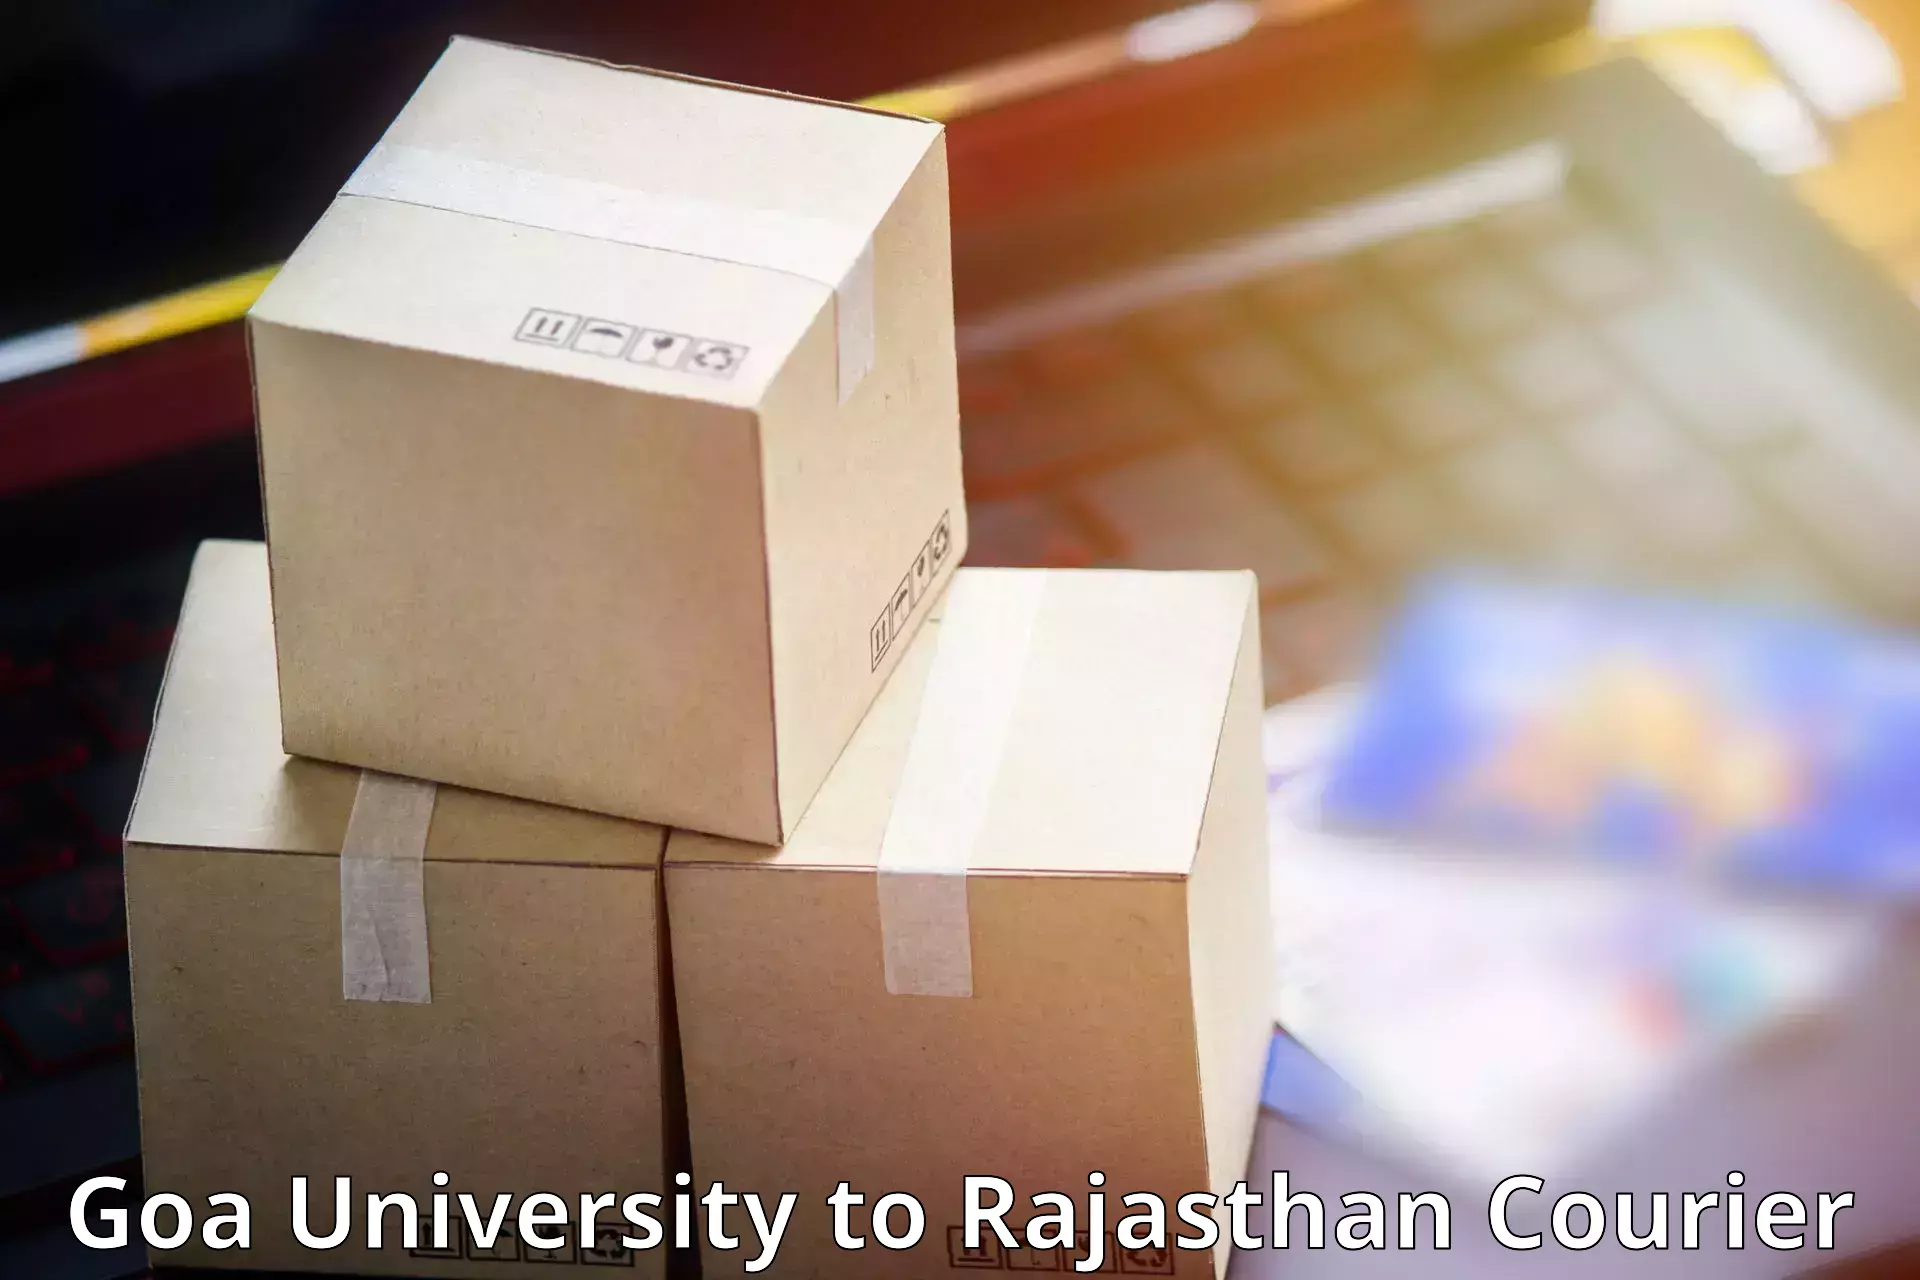 Global shipping networks Goa University to Piparcity